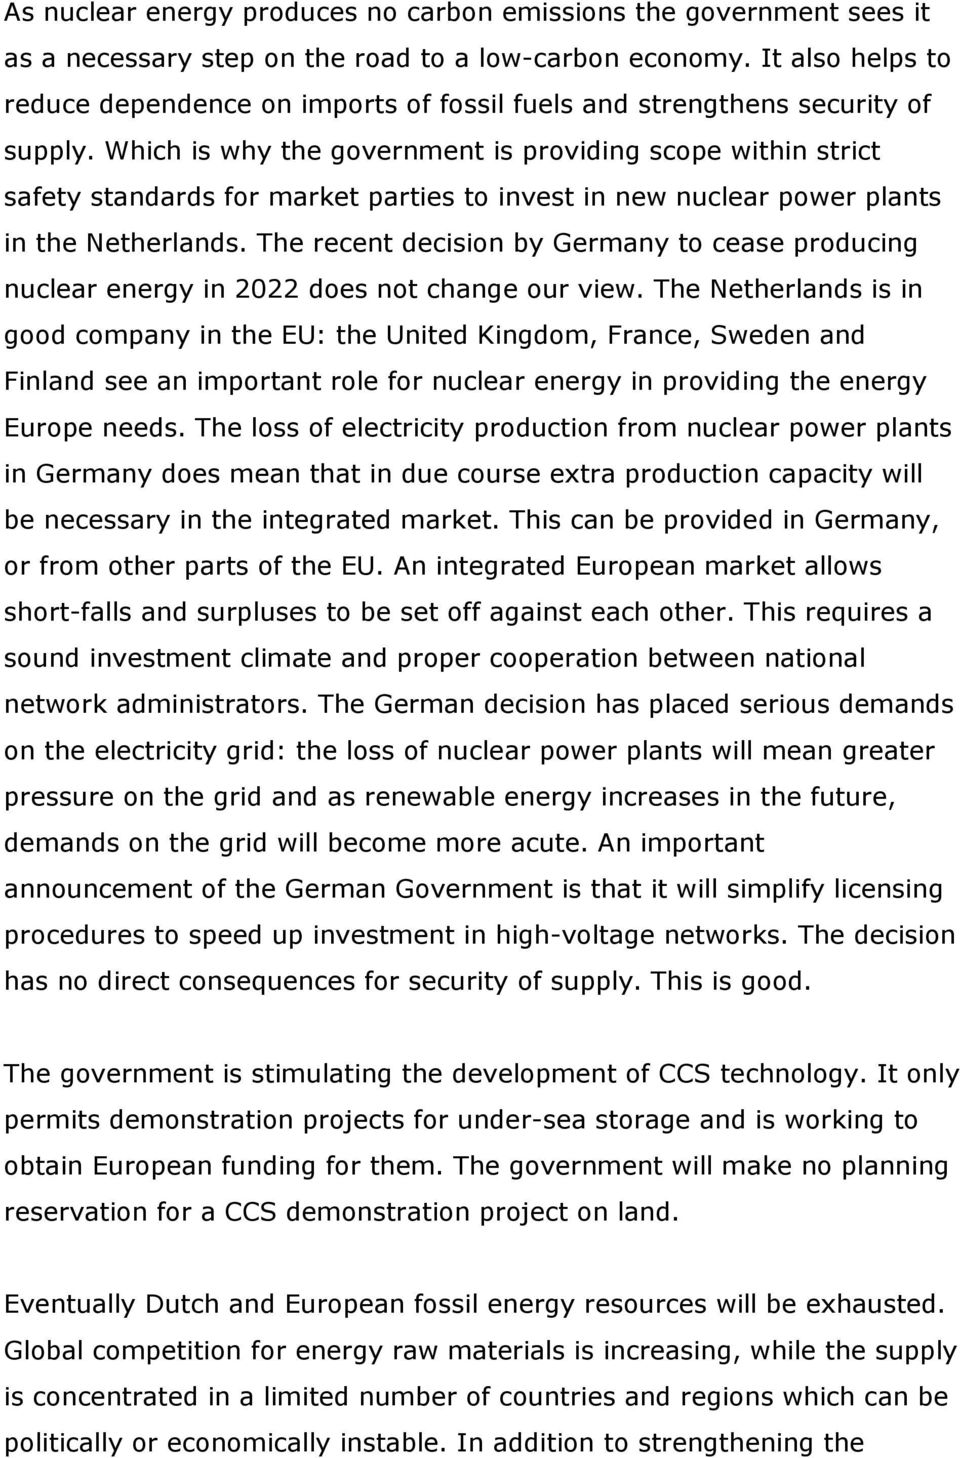 Which is why the government is providing scope within strict safety standards for market parties to invest in new nuclear power plants in the Netherlands.